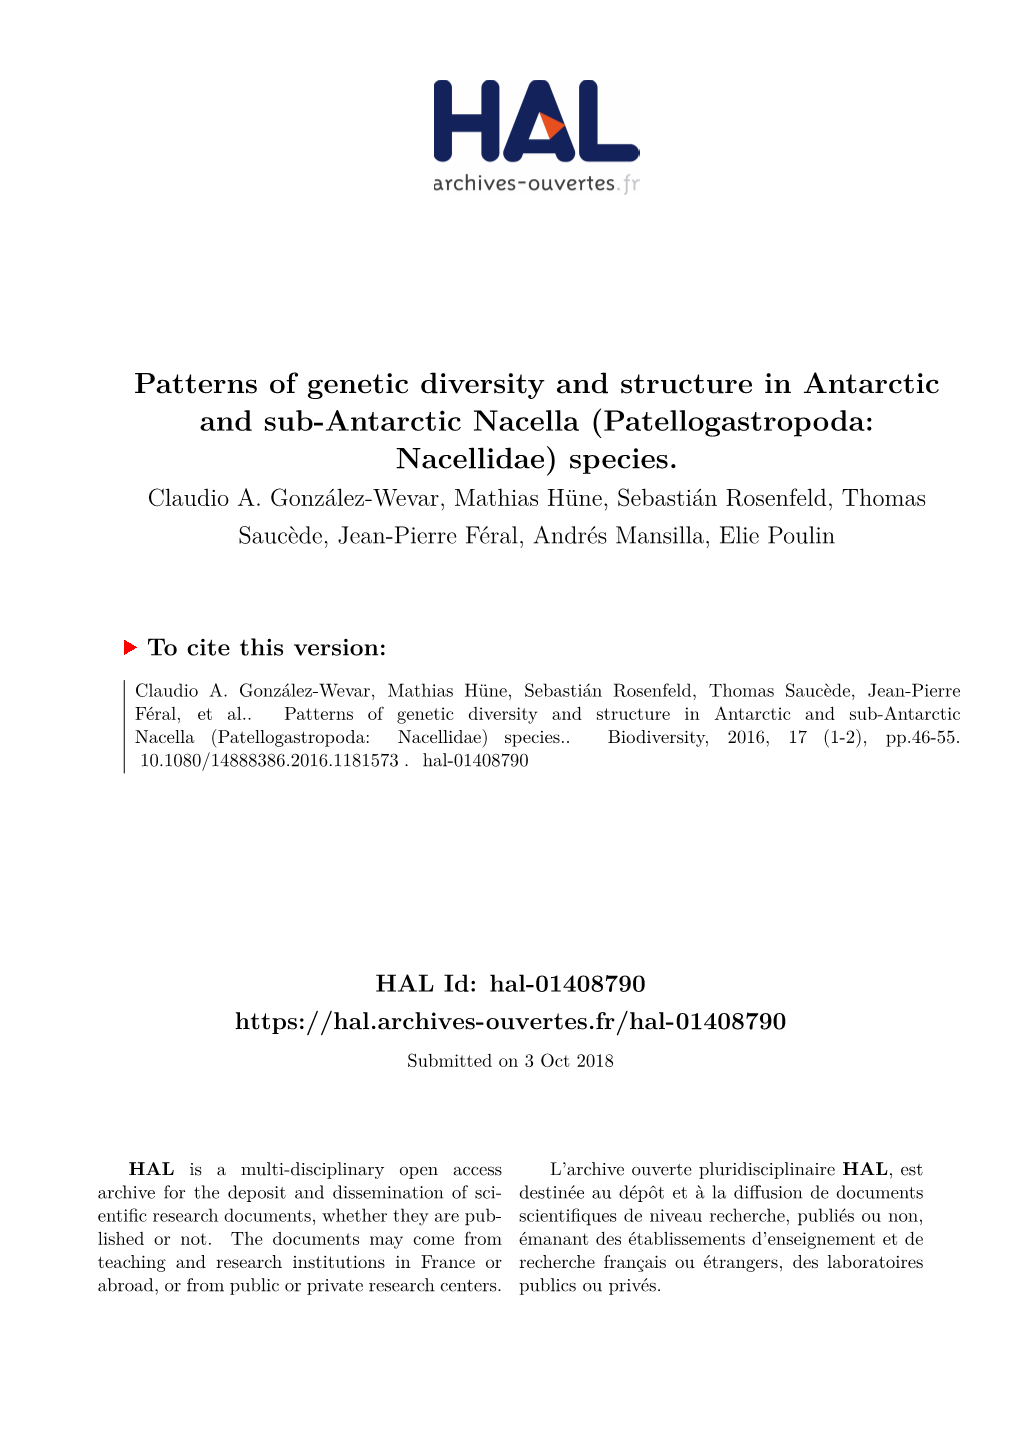 Patterns of Genetic Diversity and Structure in Antarctic and Sub-Antarctic Nacella (Patellogastropoda: Nacellidae) Species